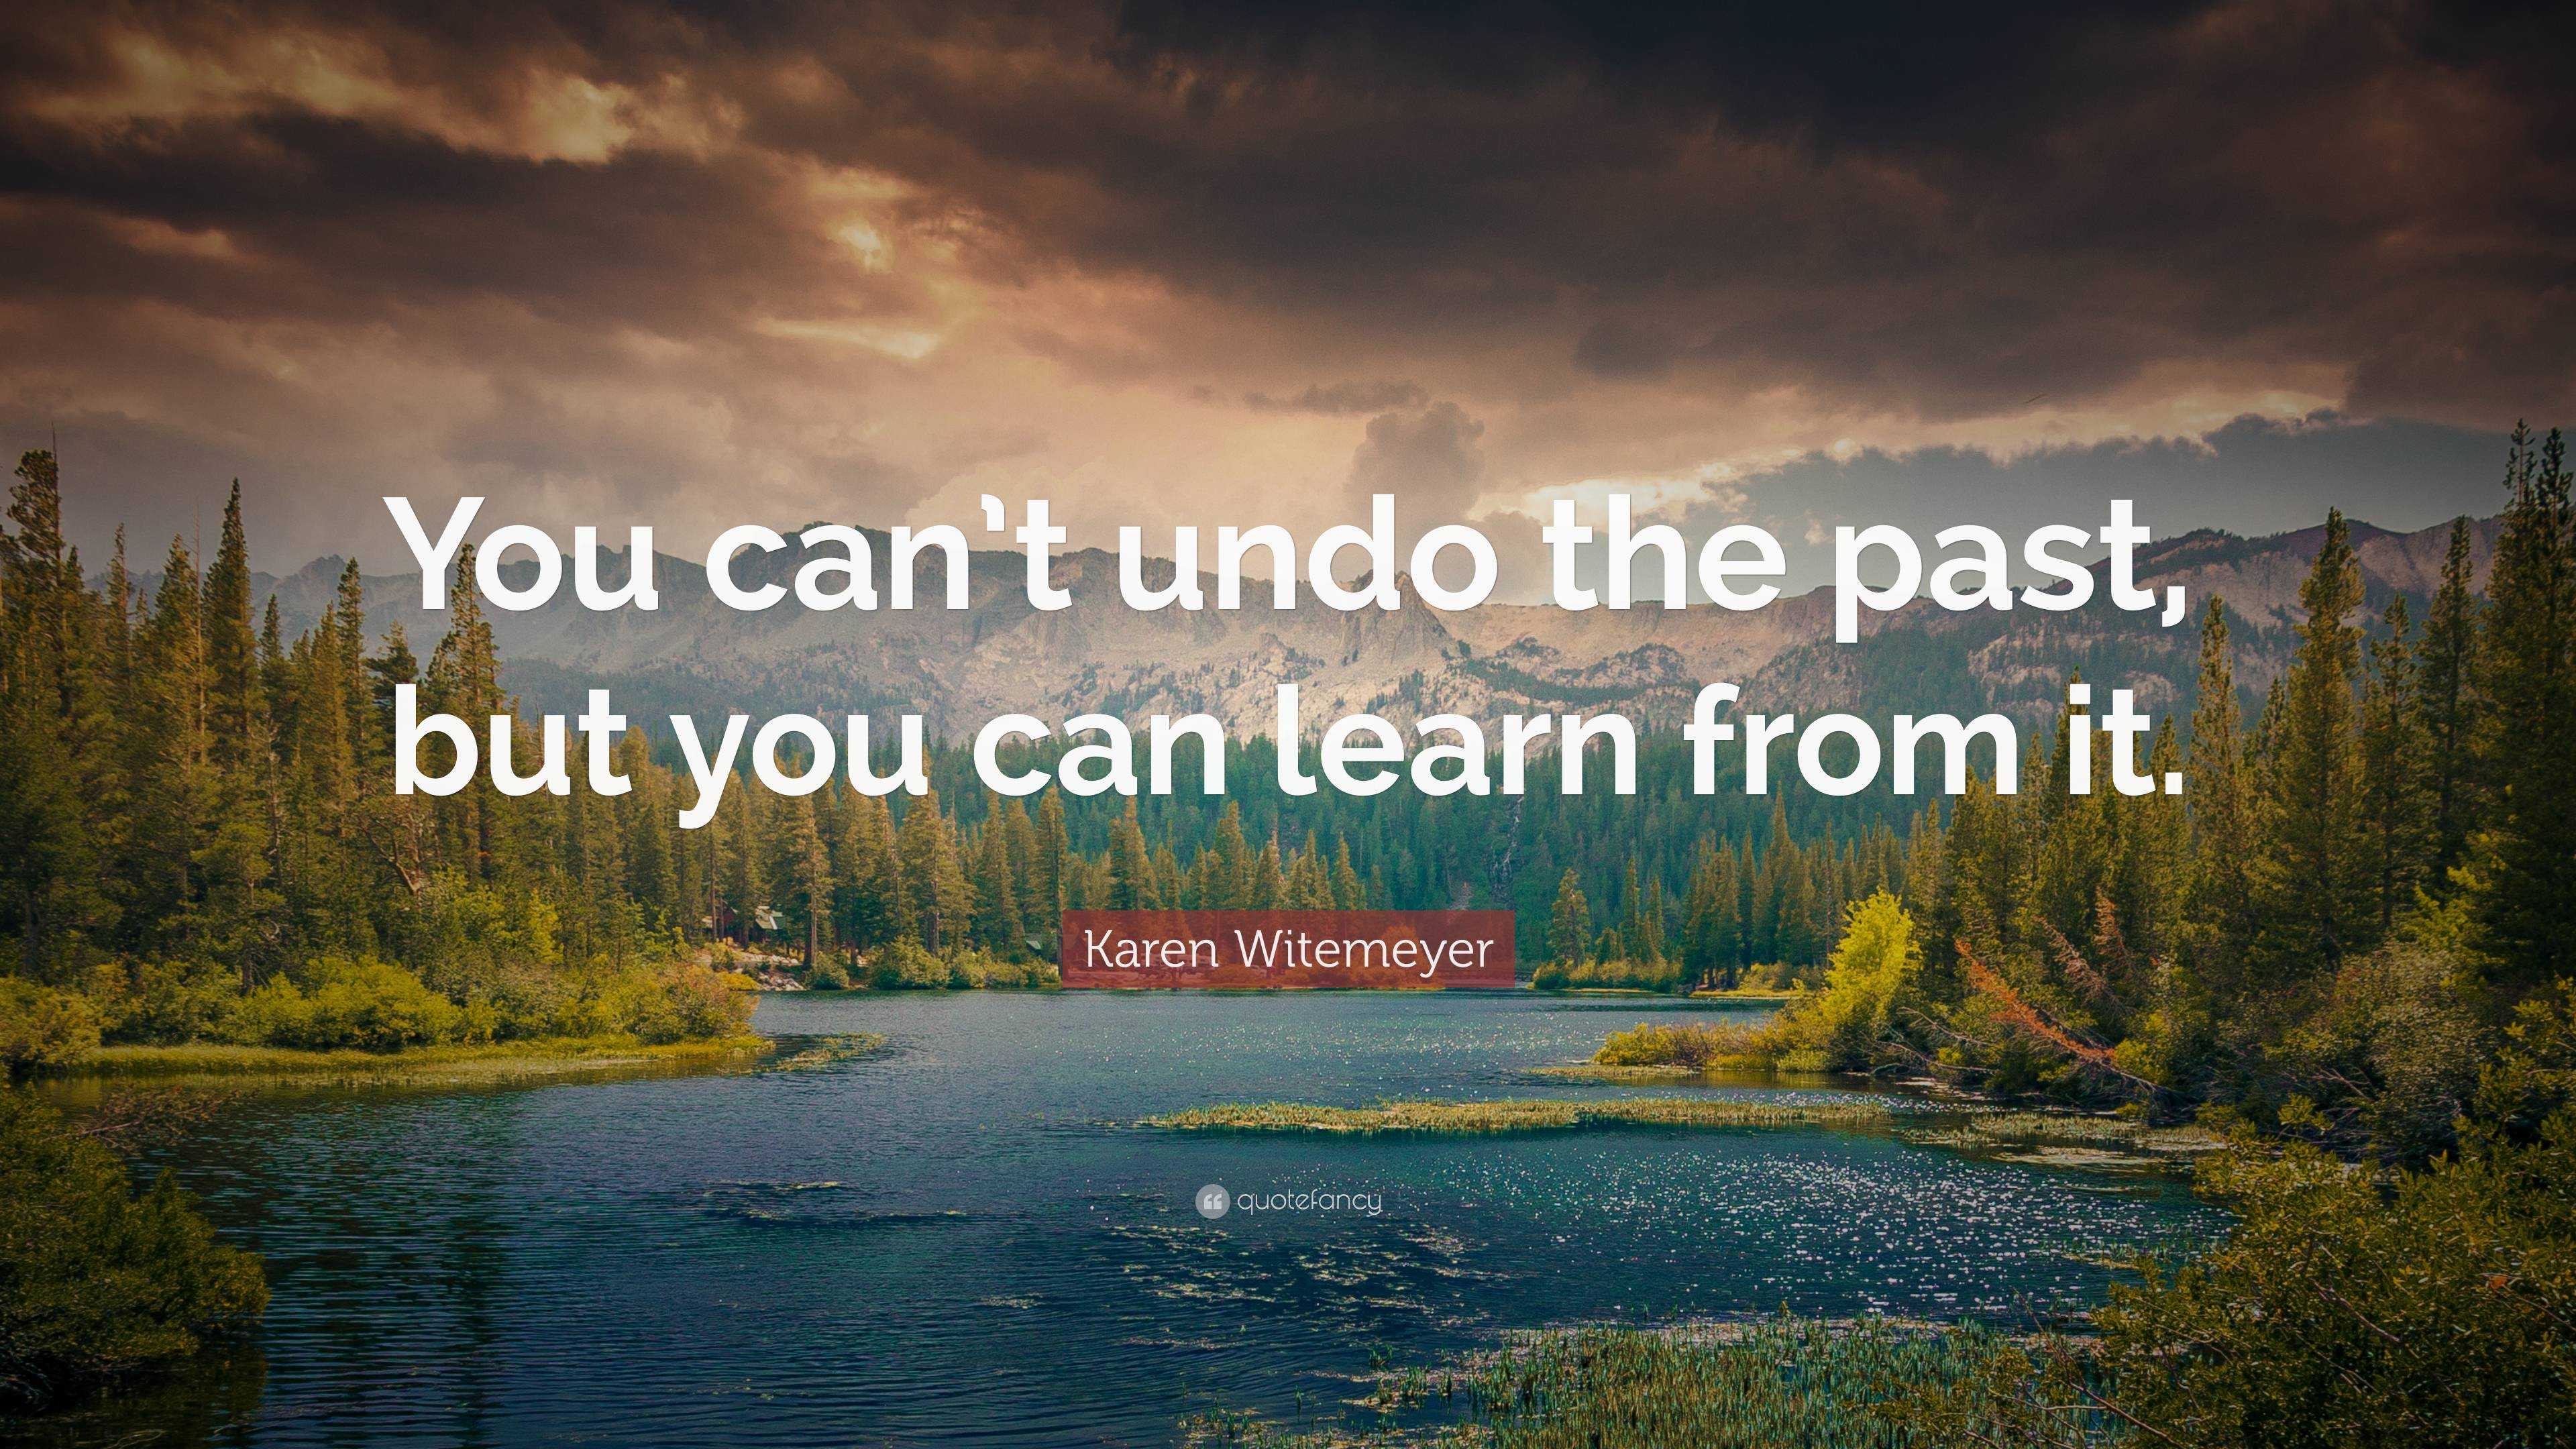 Karen Witemeyer Quote: “You can’t undo the past, but you can learn from ...